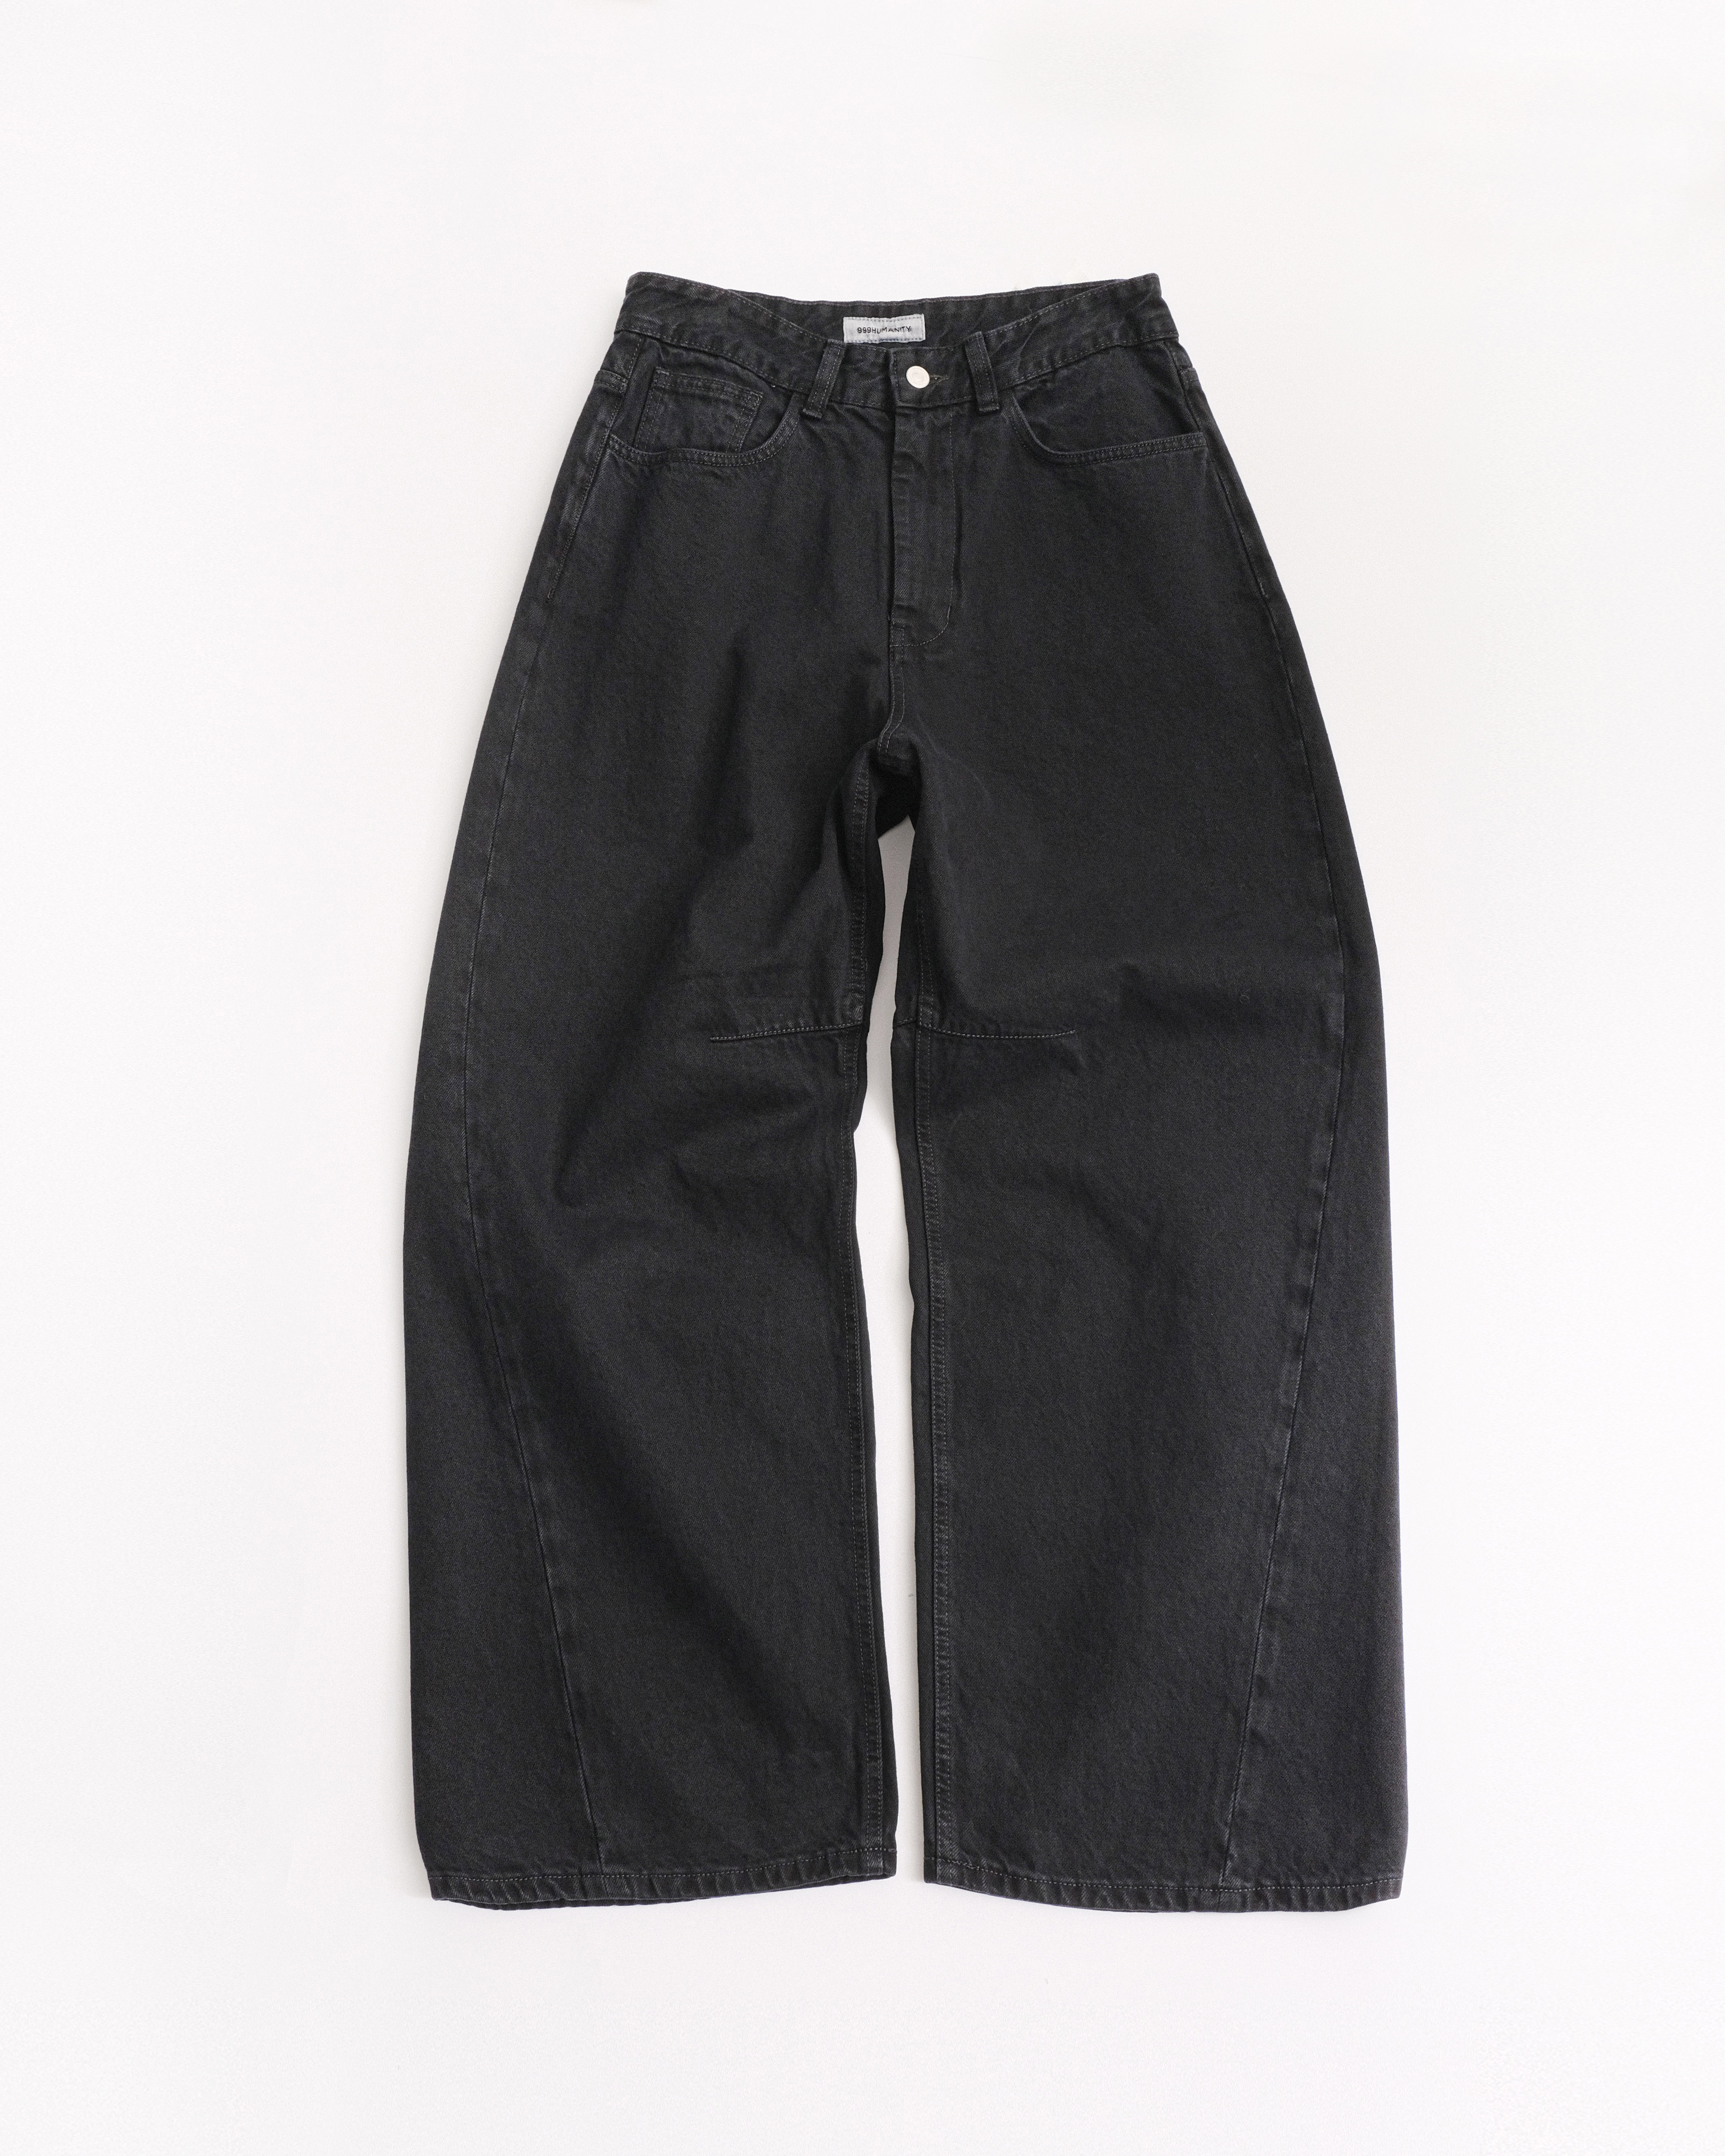 [RESTOCK] CURVED SULFUR DYED DENIM (DYED CHARCOAL)